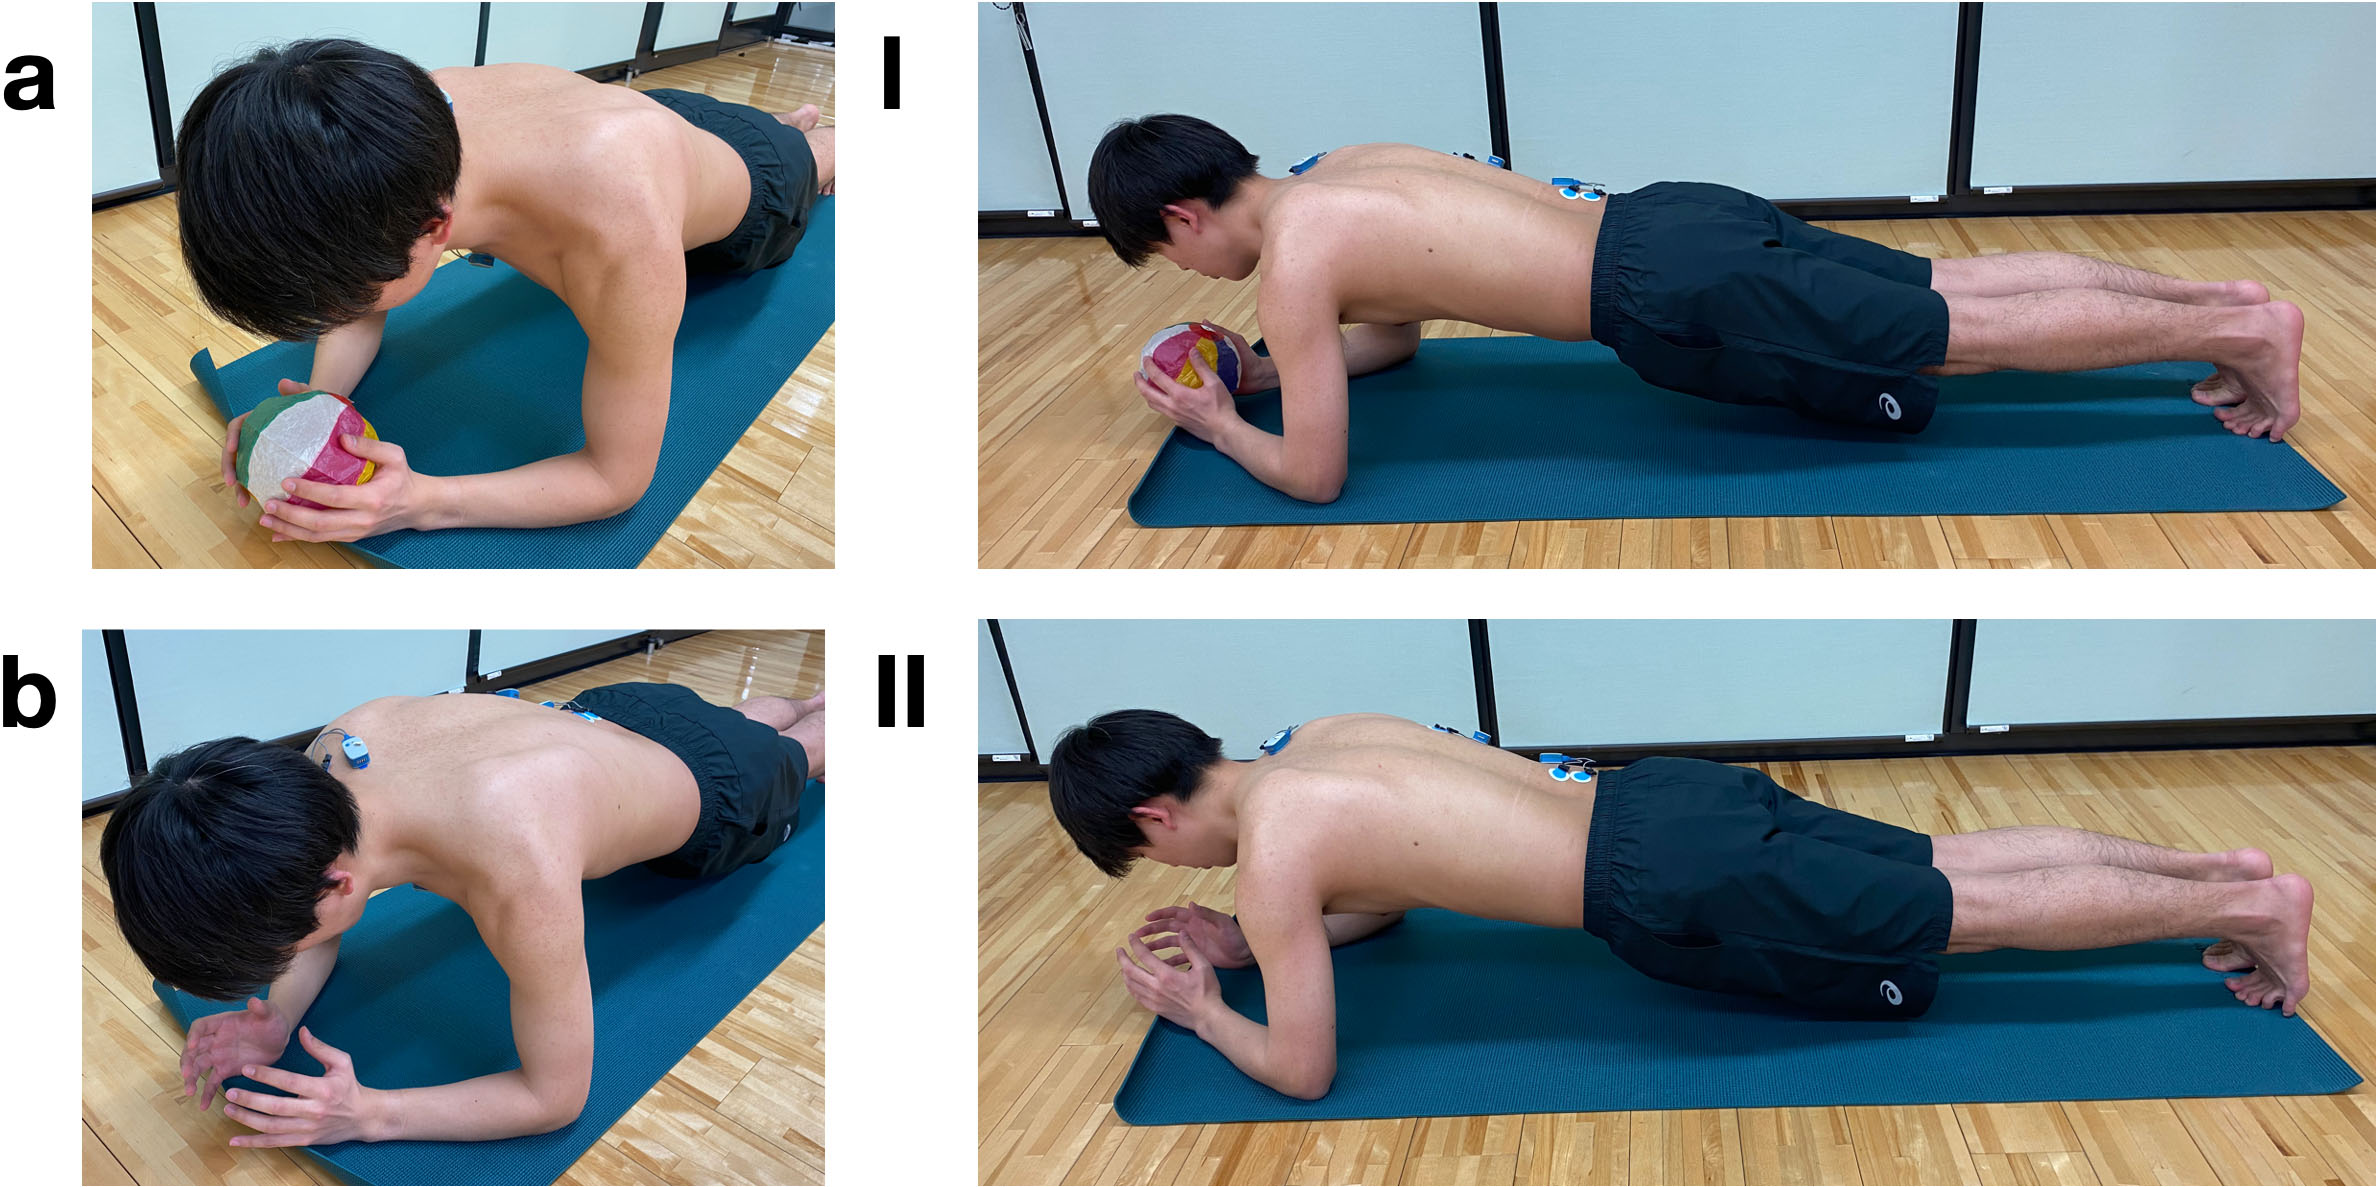 Plank hand placement. a: Paper balloon front plank (PBFP) hand setup. b: Front plank (FP) hand setup. I: PBFP, II: FP.